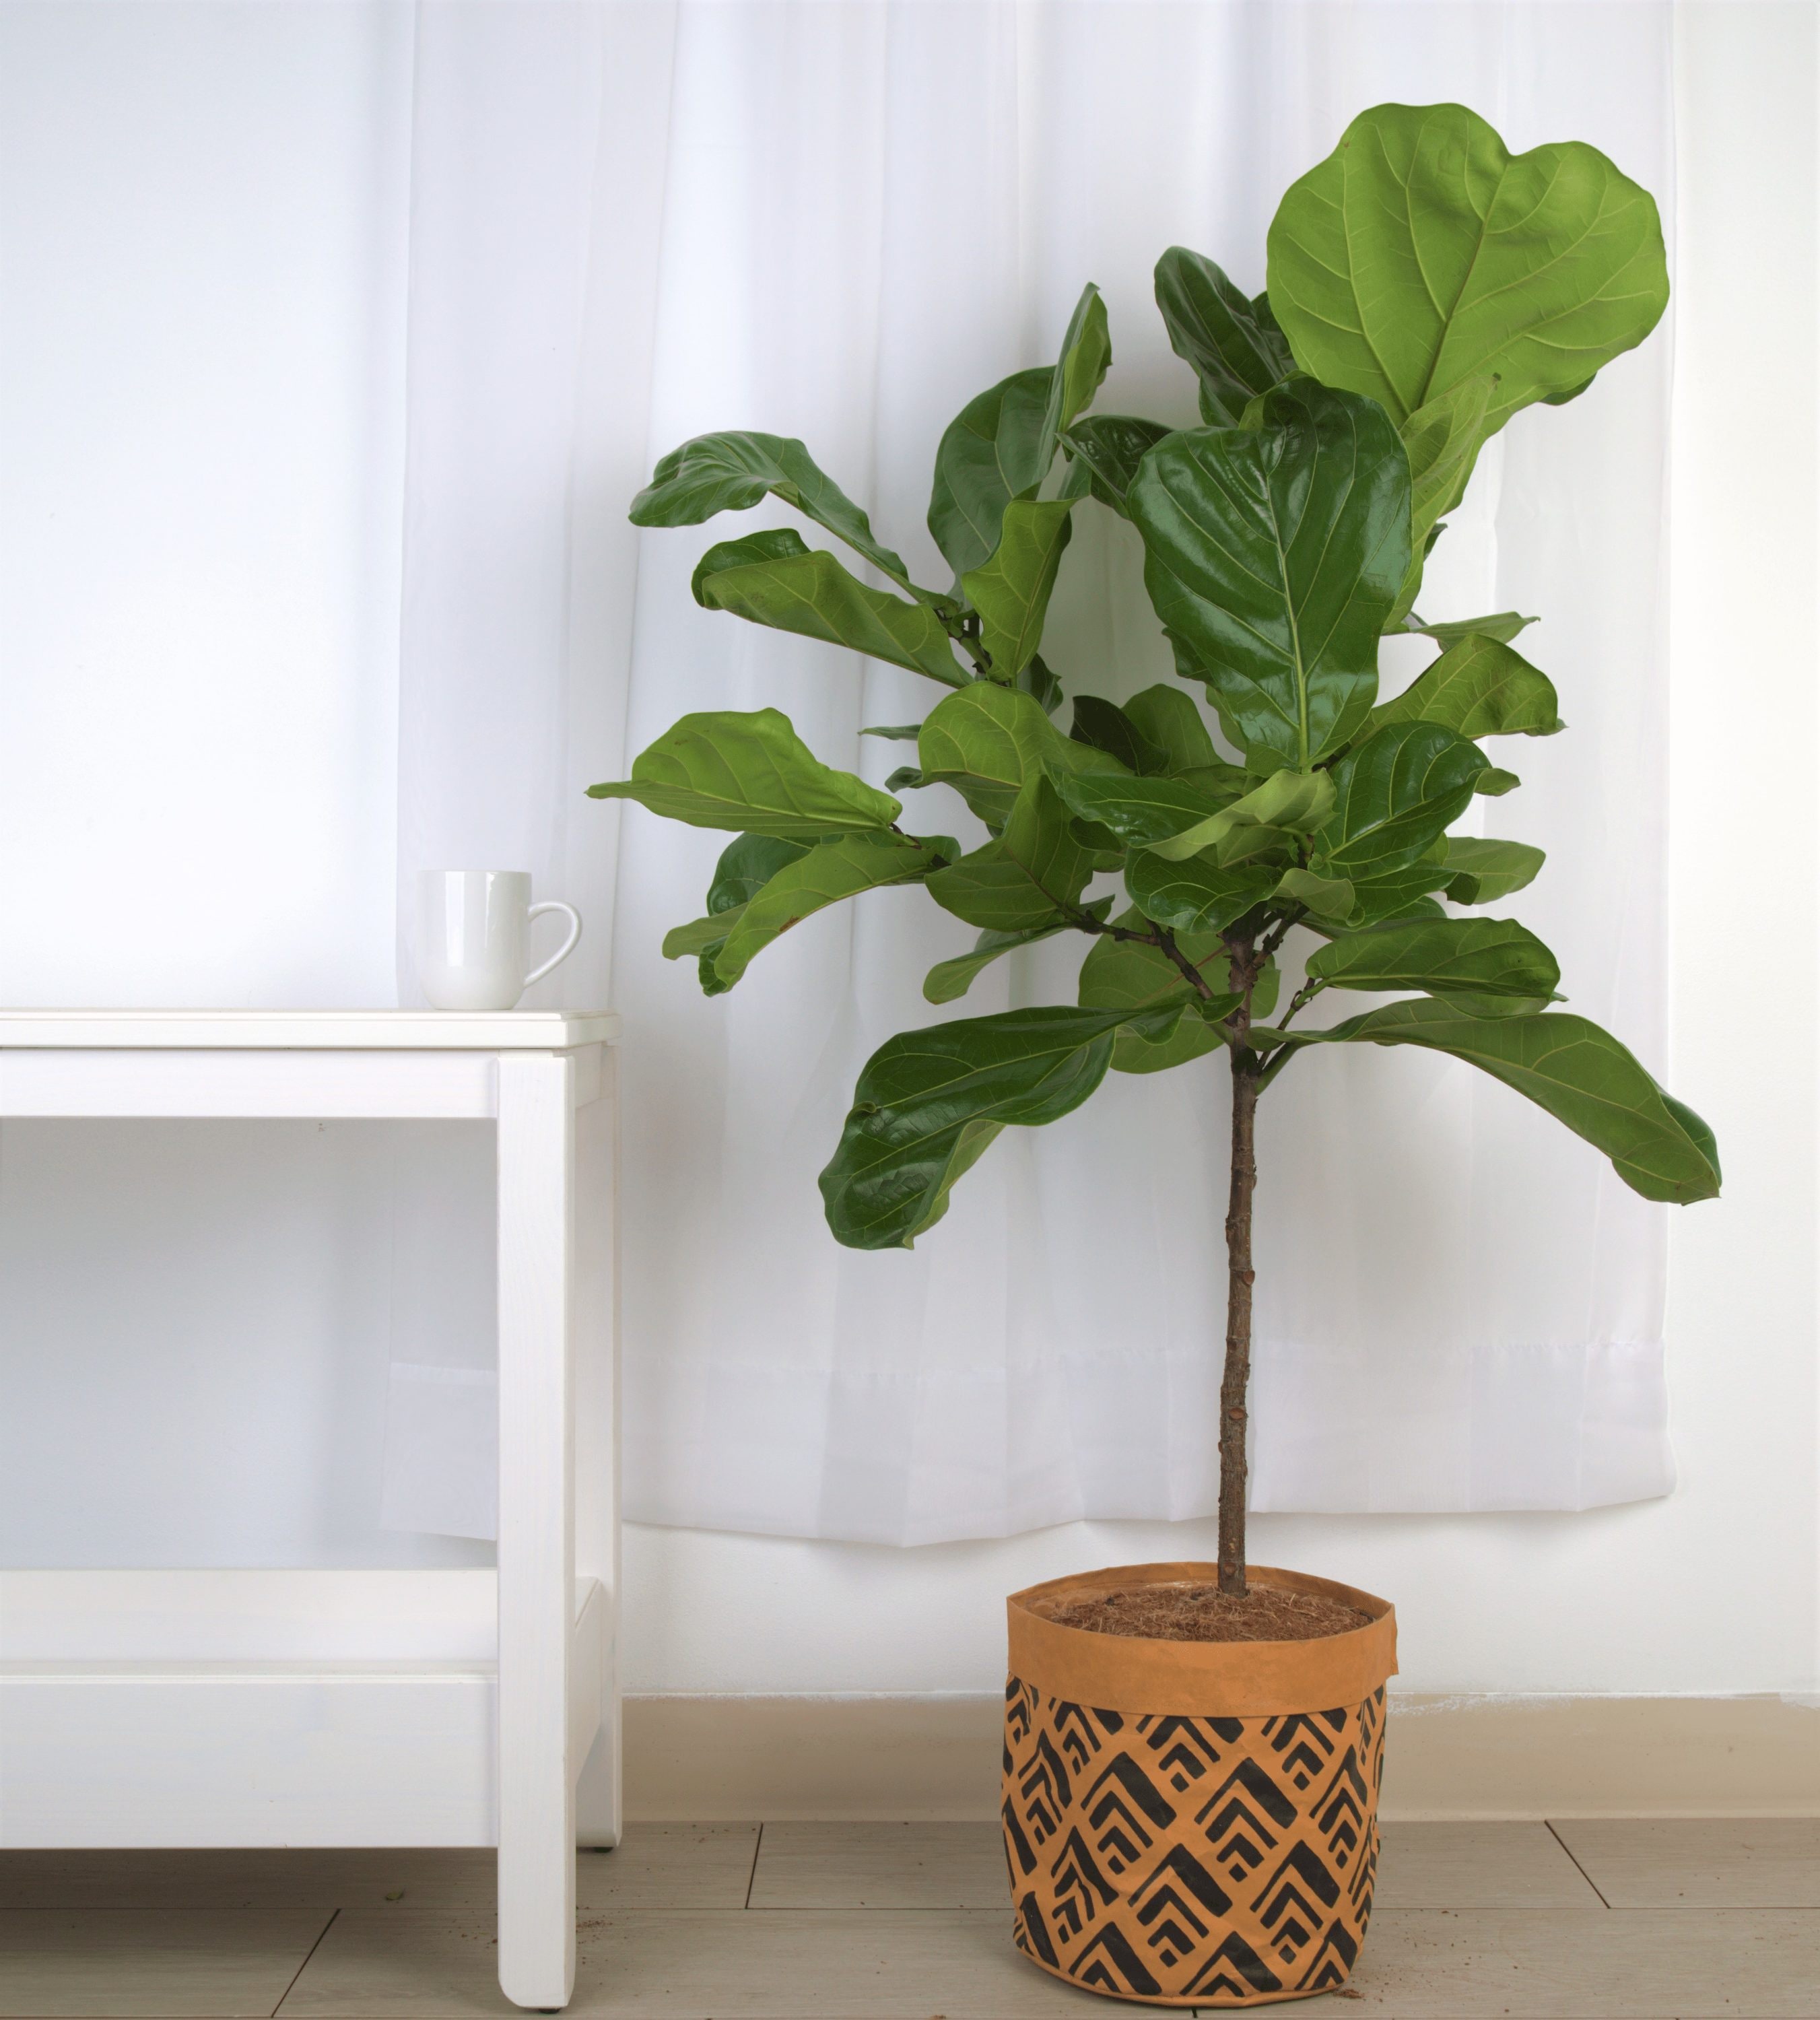 Costa Farms Fiddle Leaf Fig House plant in 10-in Planter in the